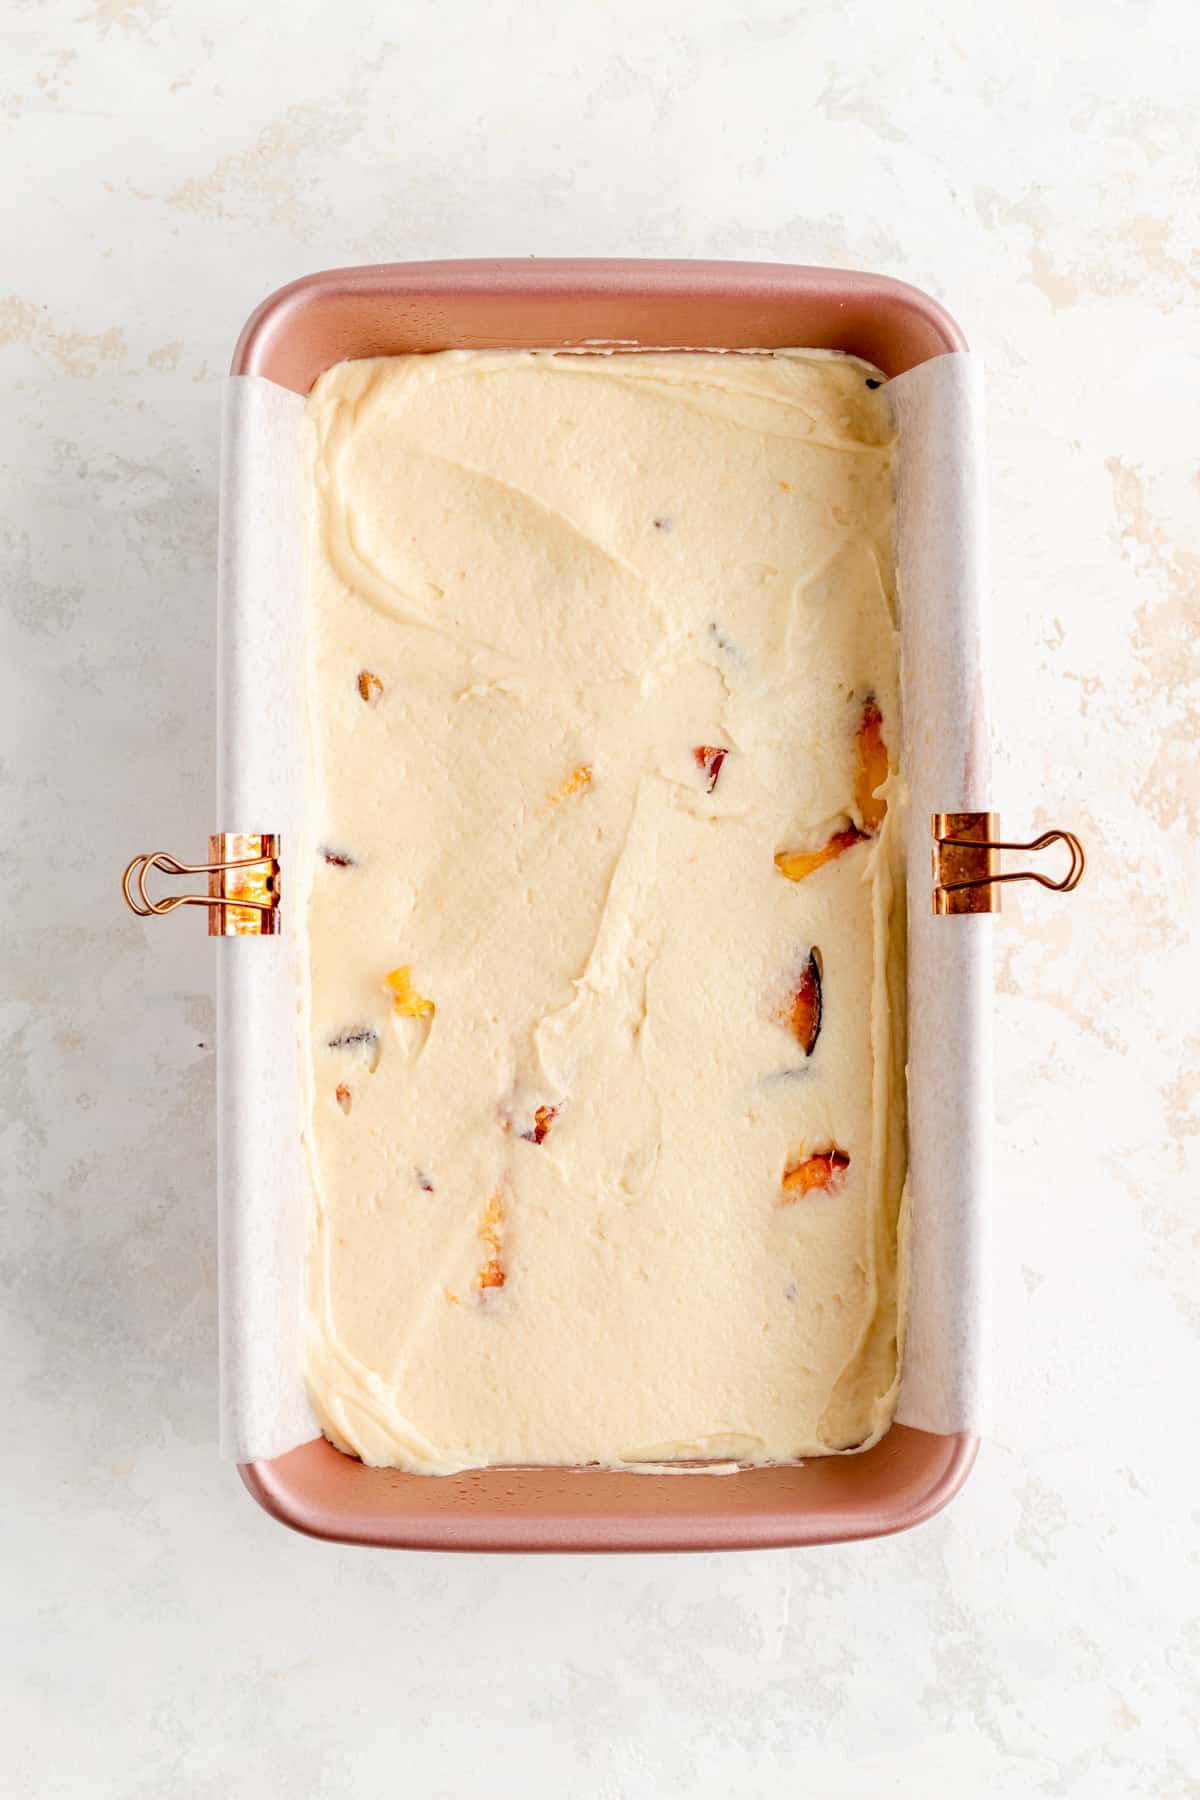 peach cobbler pound cake batter spread evenly in parchment-lined pink loaf pan.